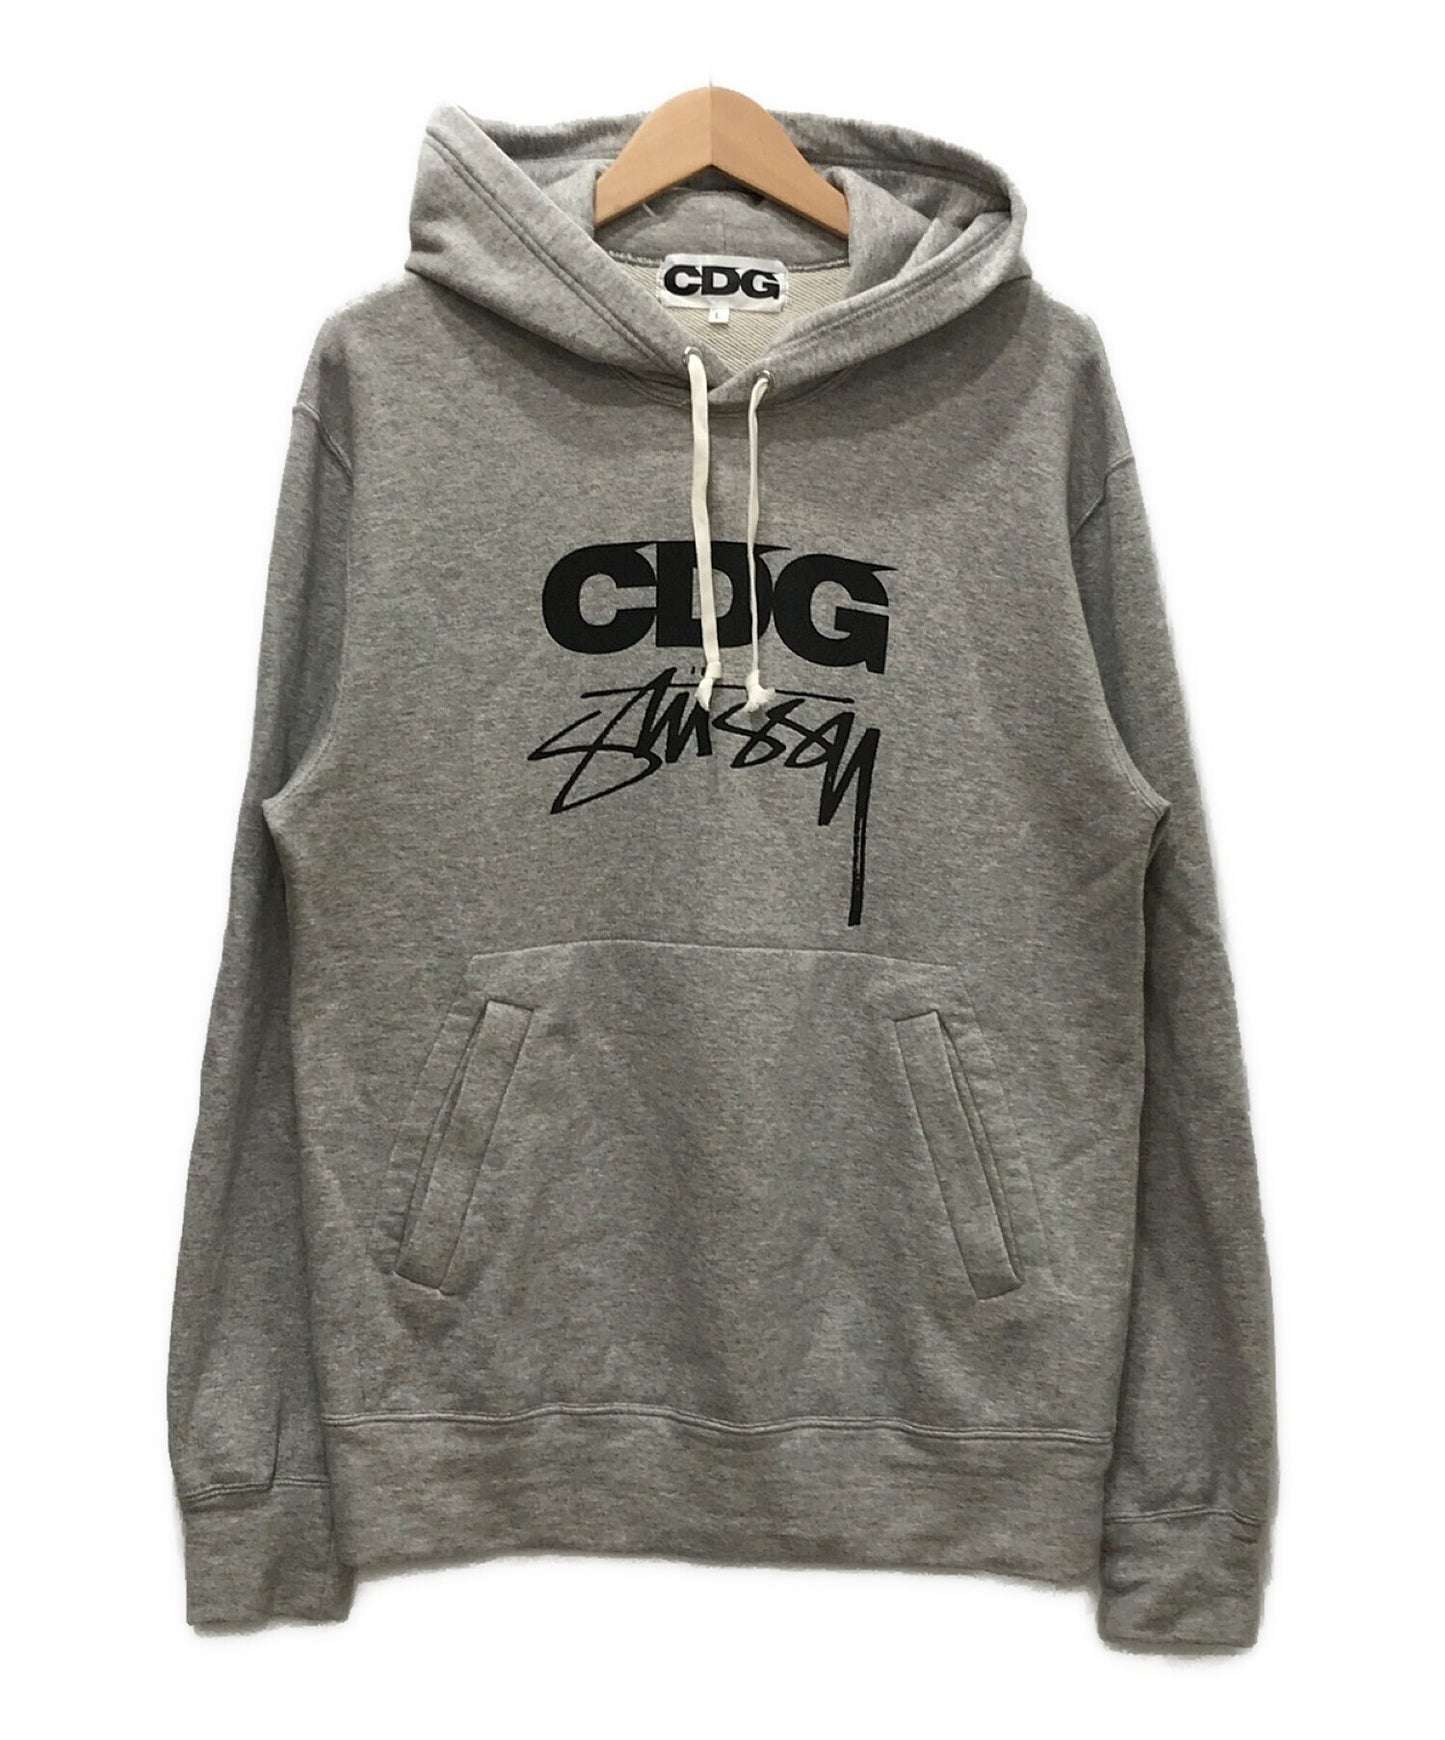 CDG X STUSSY HOODIE Grey 2021 Brand New Authentic Size Small